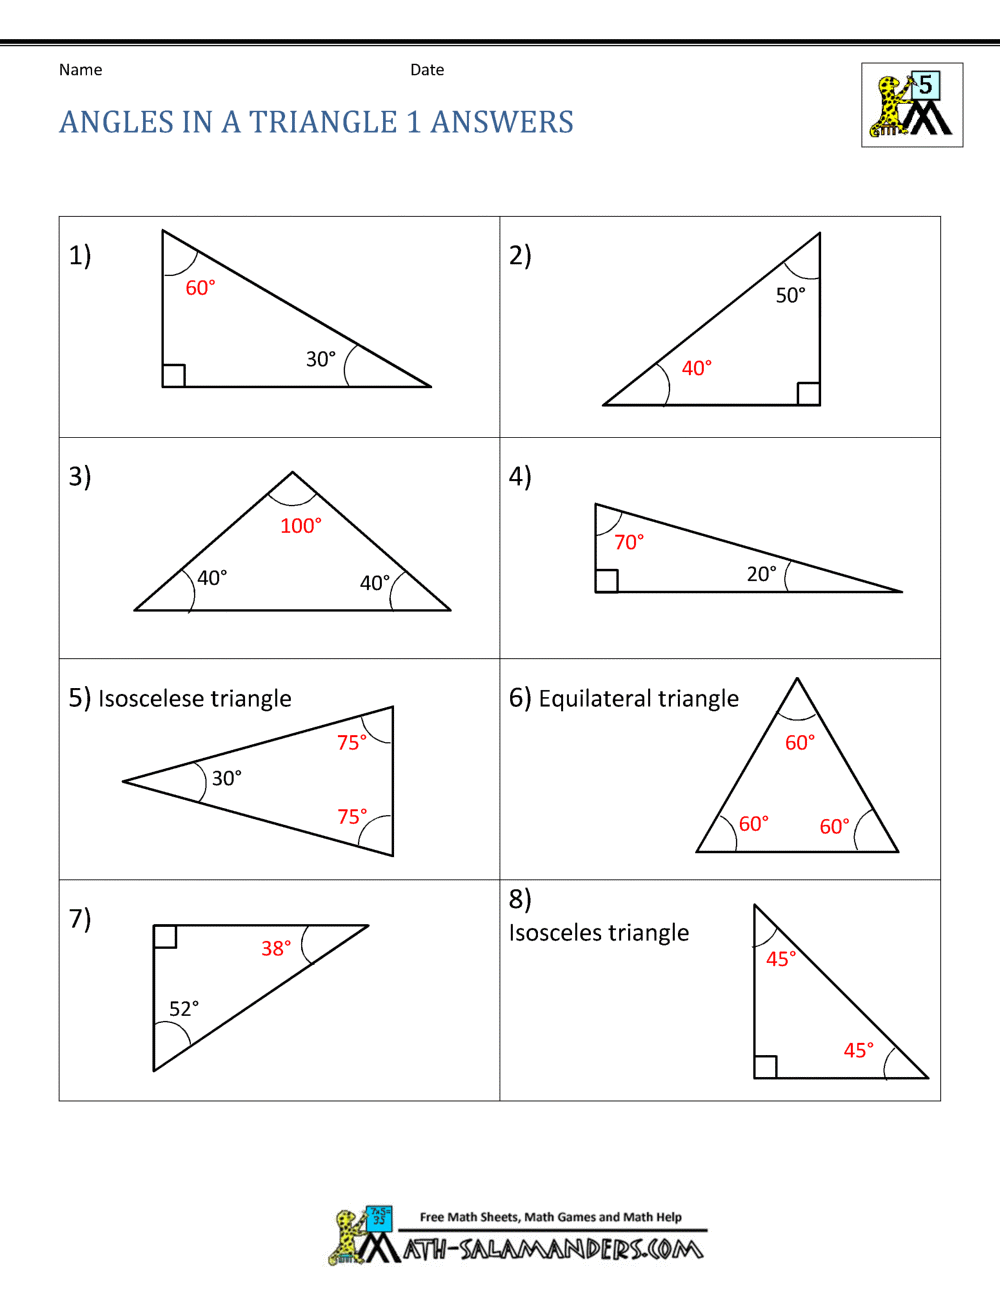 22th Grade Geometry With Triangle Angle Sum Worksheet